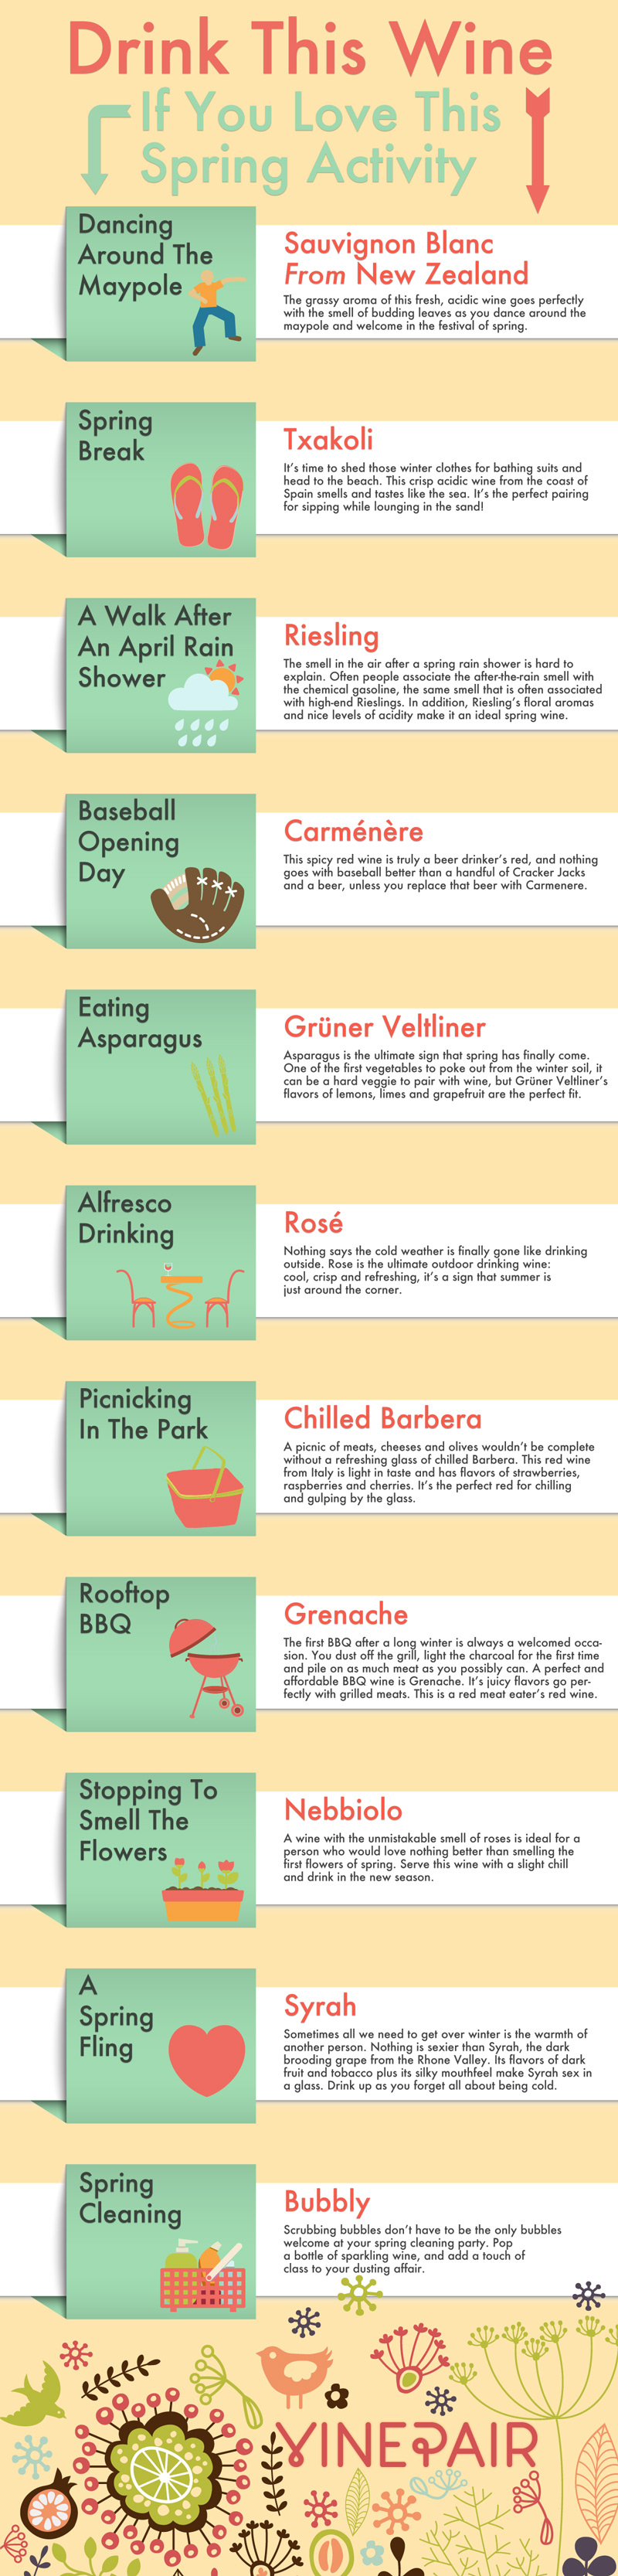 Wines To Drink In The Spring For Your Favorite Activity [INFOGRAPHIC]